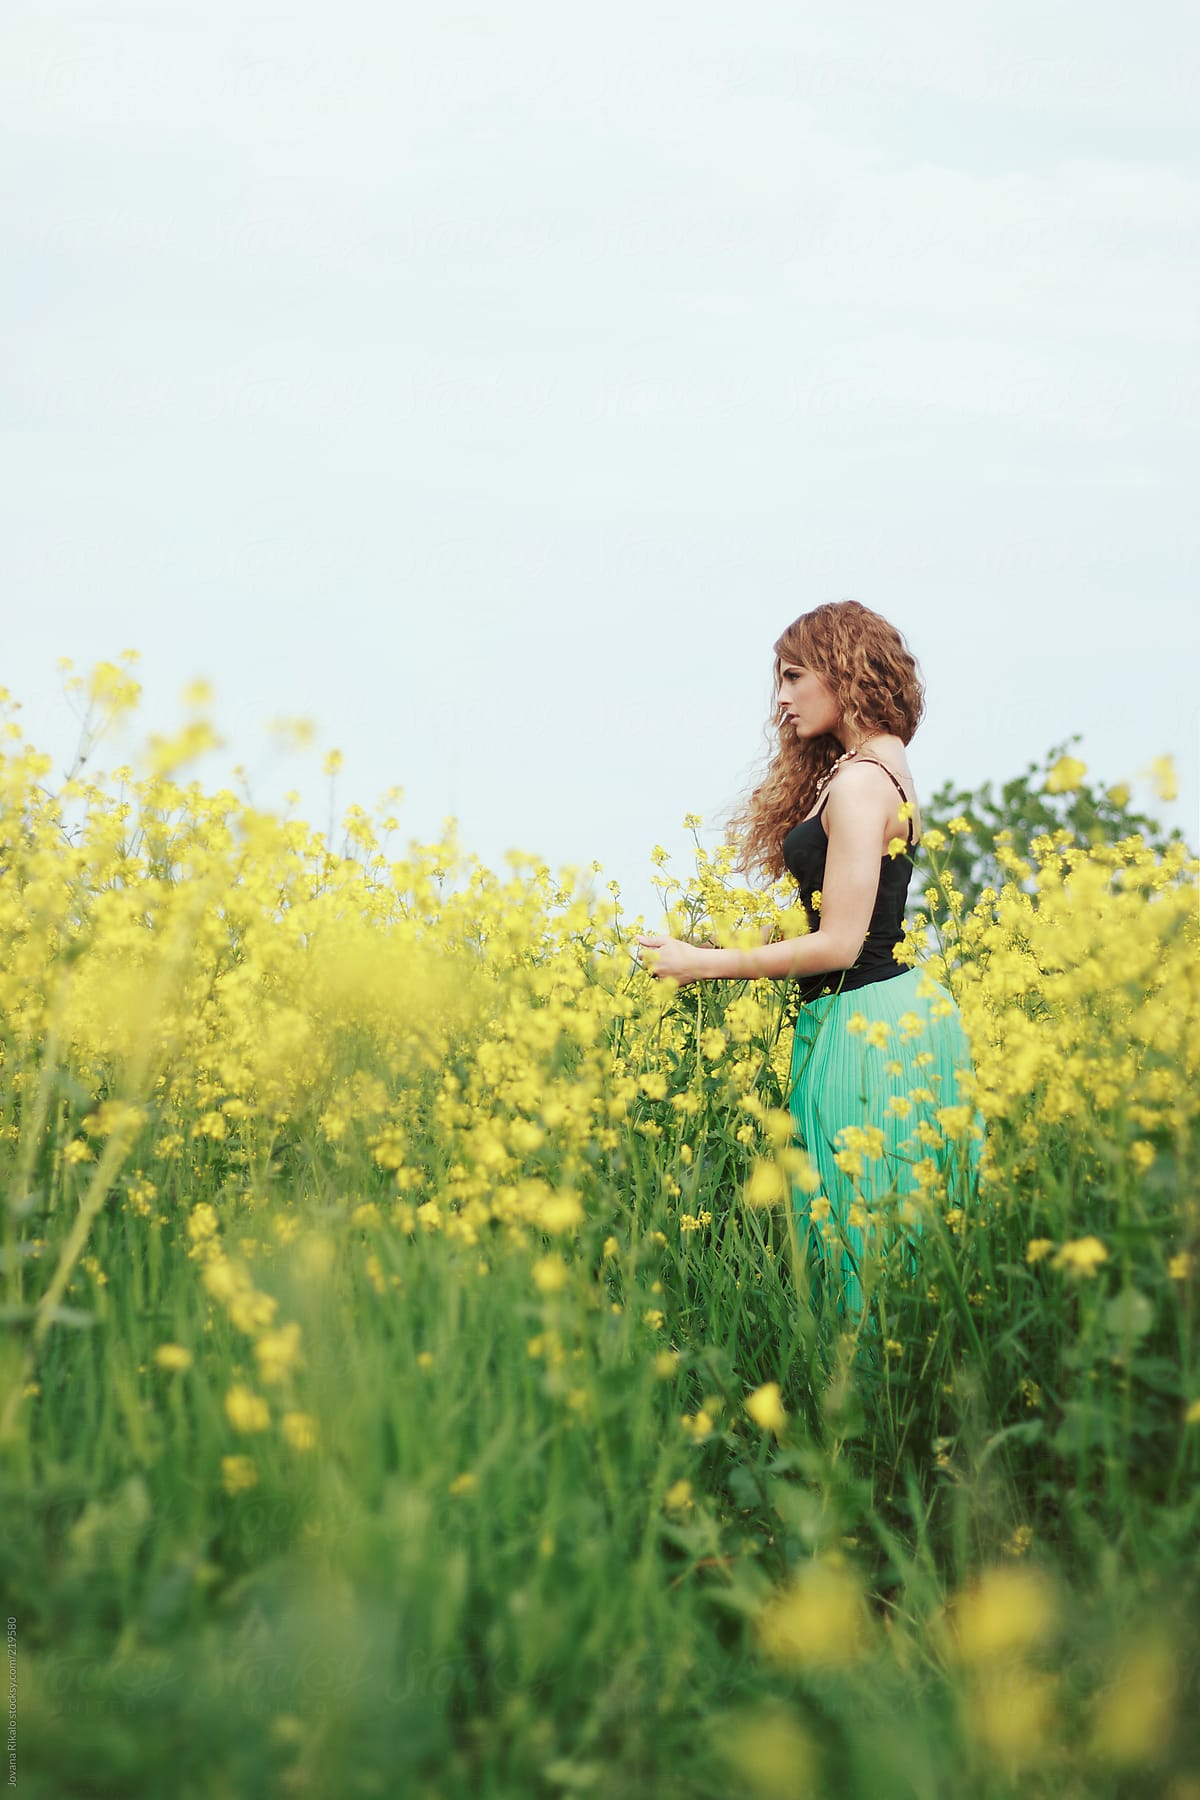 Young Beautiful Woman Standing In A Field Full Of Flowers By Stocksy Contributor Jovana